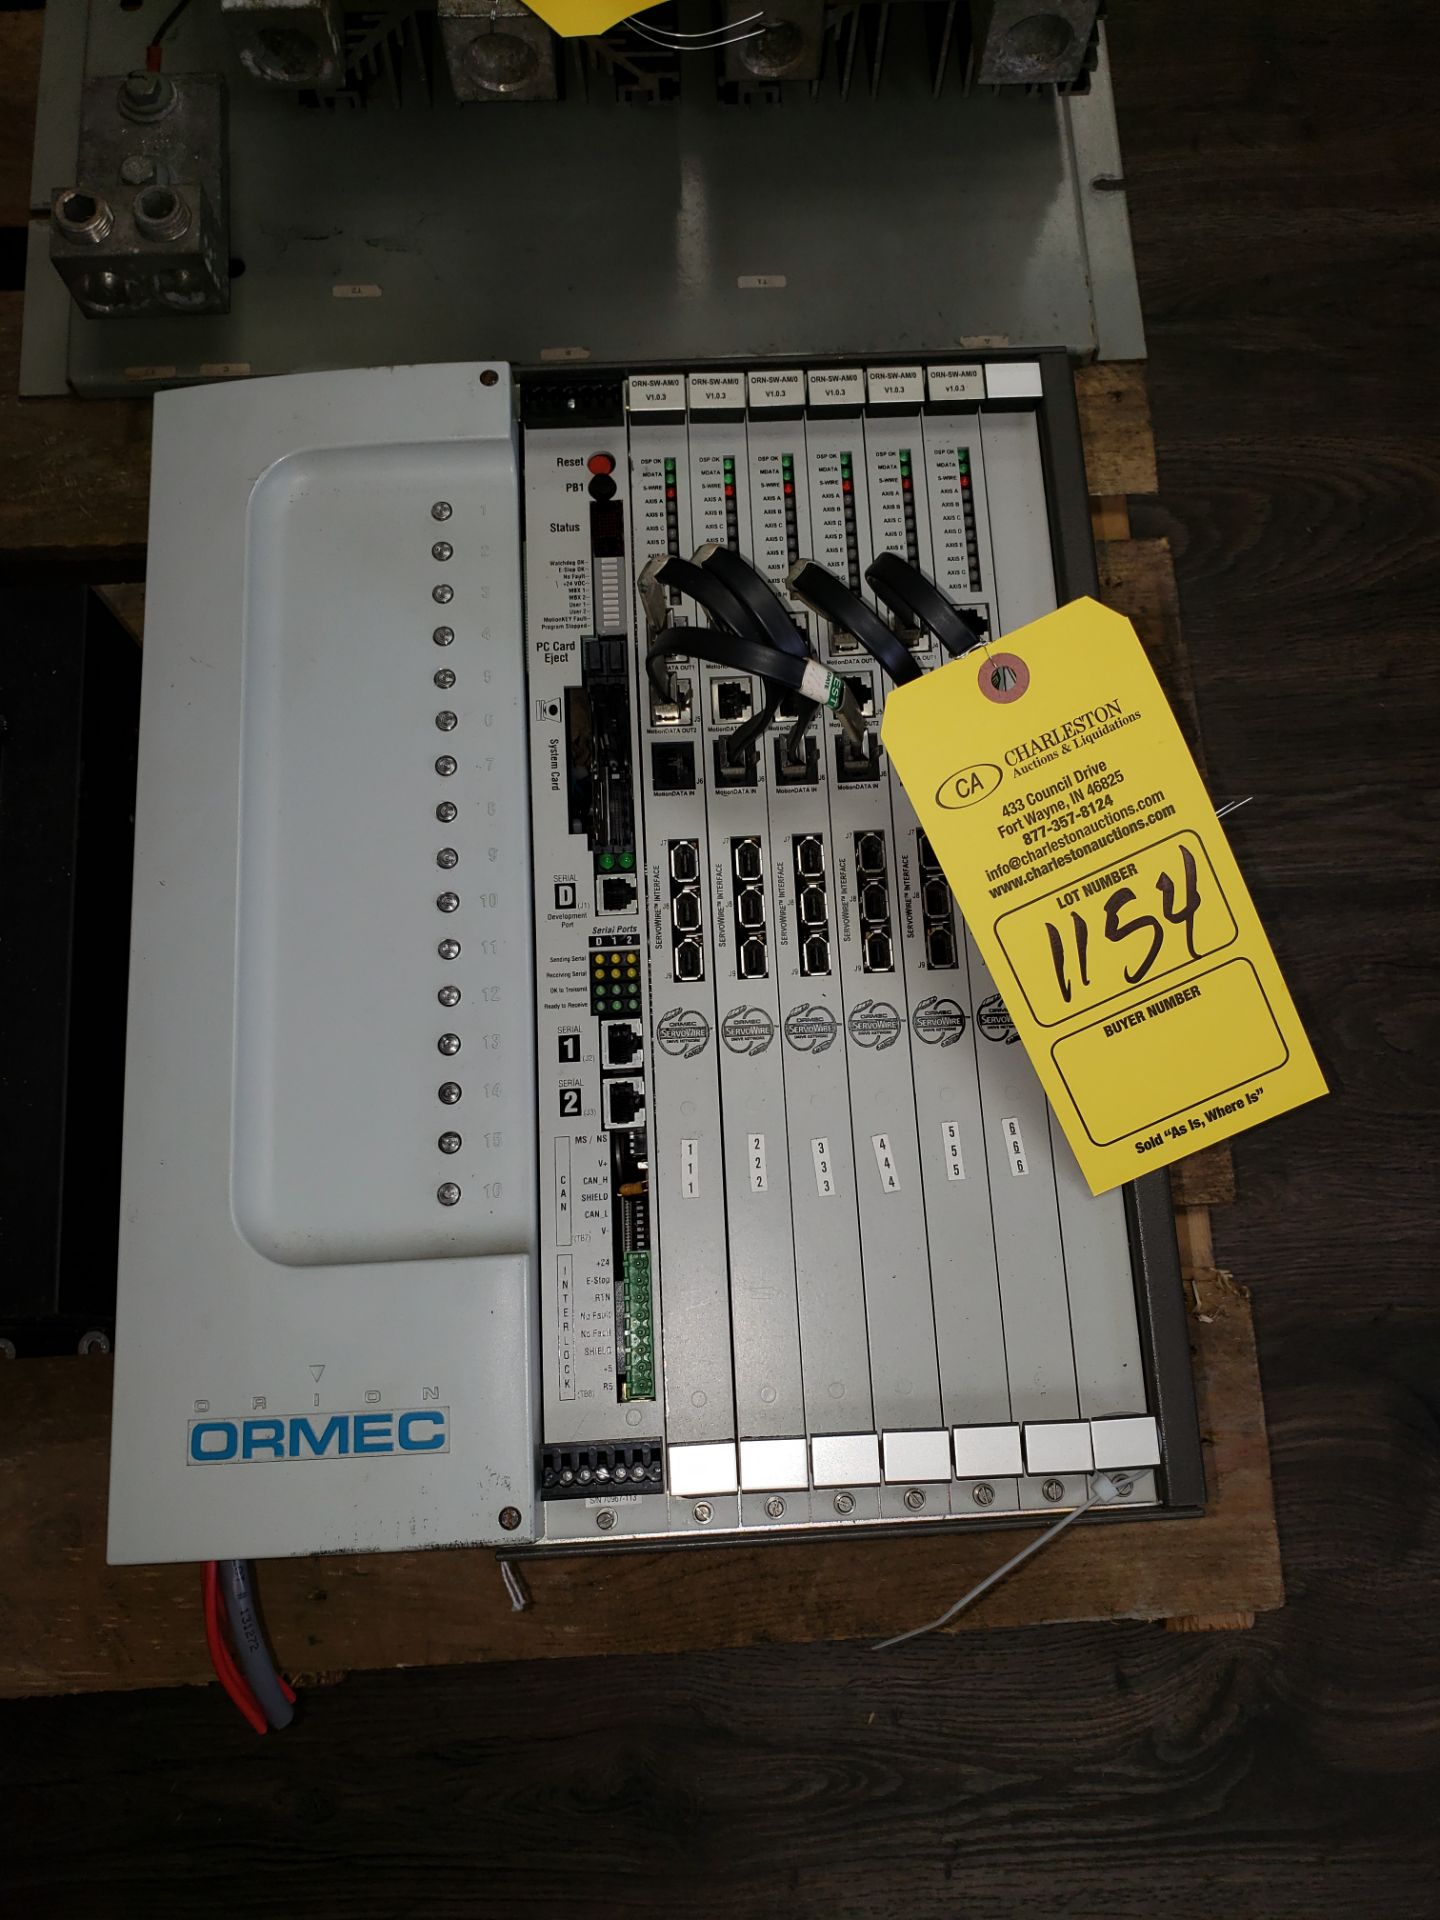 ORMEC MOTION CONTROLLER MODEL-ORN-70/CFEHS S#18175 (LOCATED AT: 432 COUNCIL DRIVE FORT WAYNE, IN